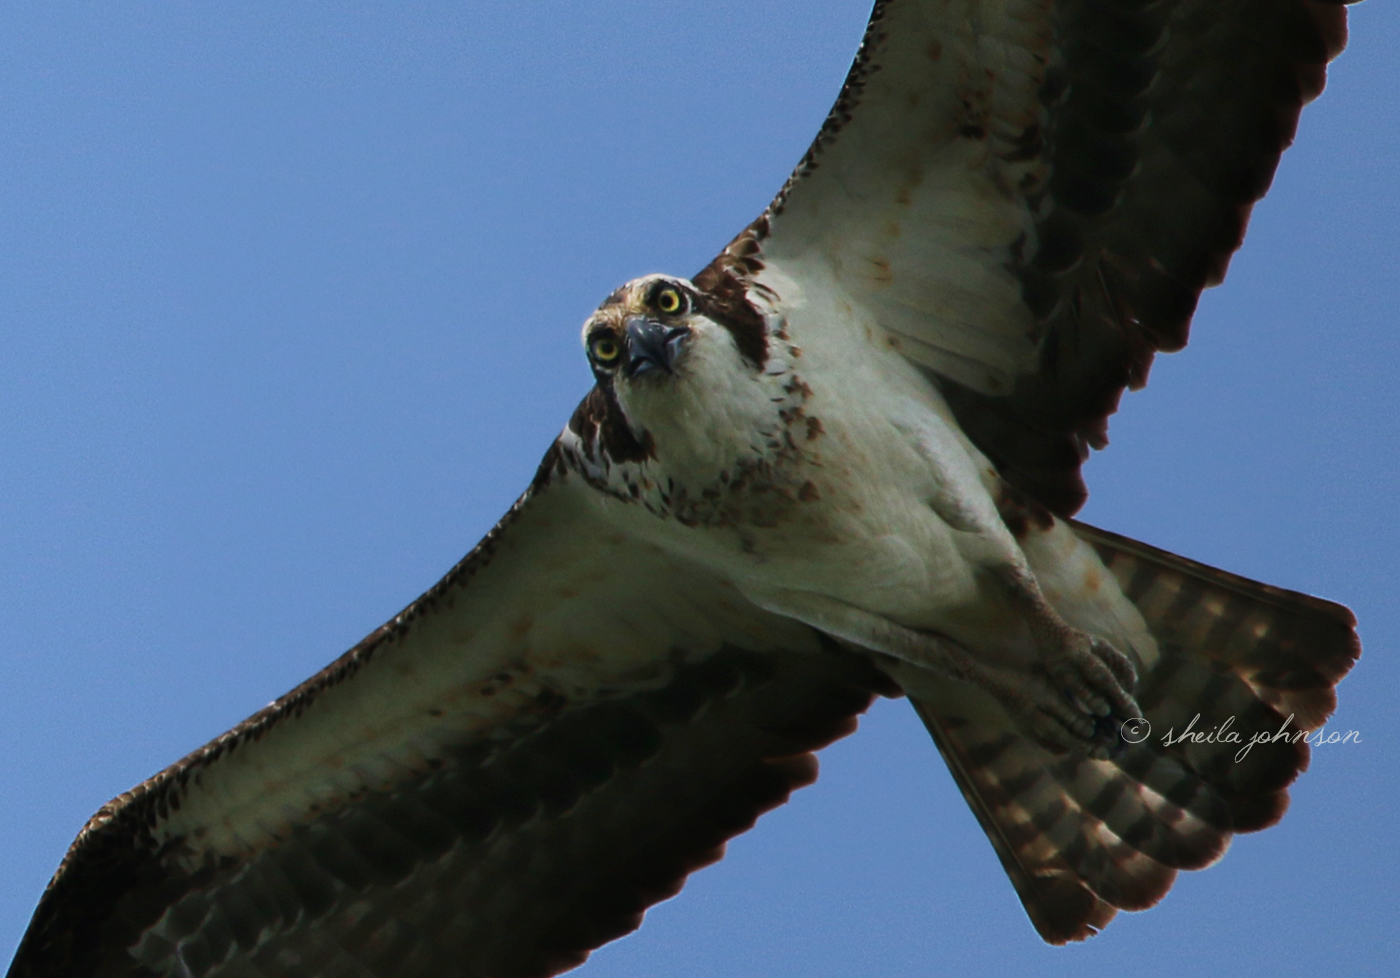 On This Particular Day, Mama Osprey Isn't Just Defending Her Nest, She Seems Downright Angry With Me! I Thank Her For The Shot, Though!